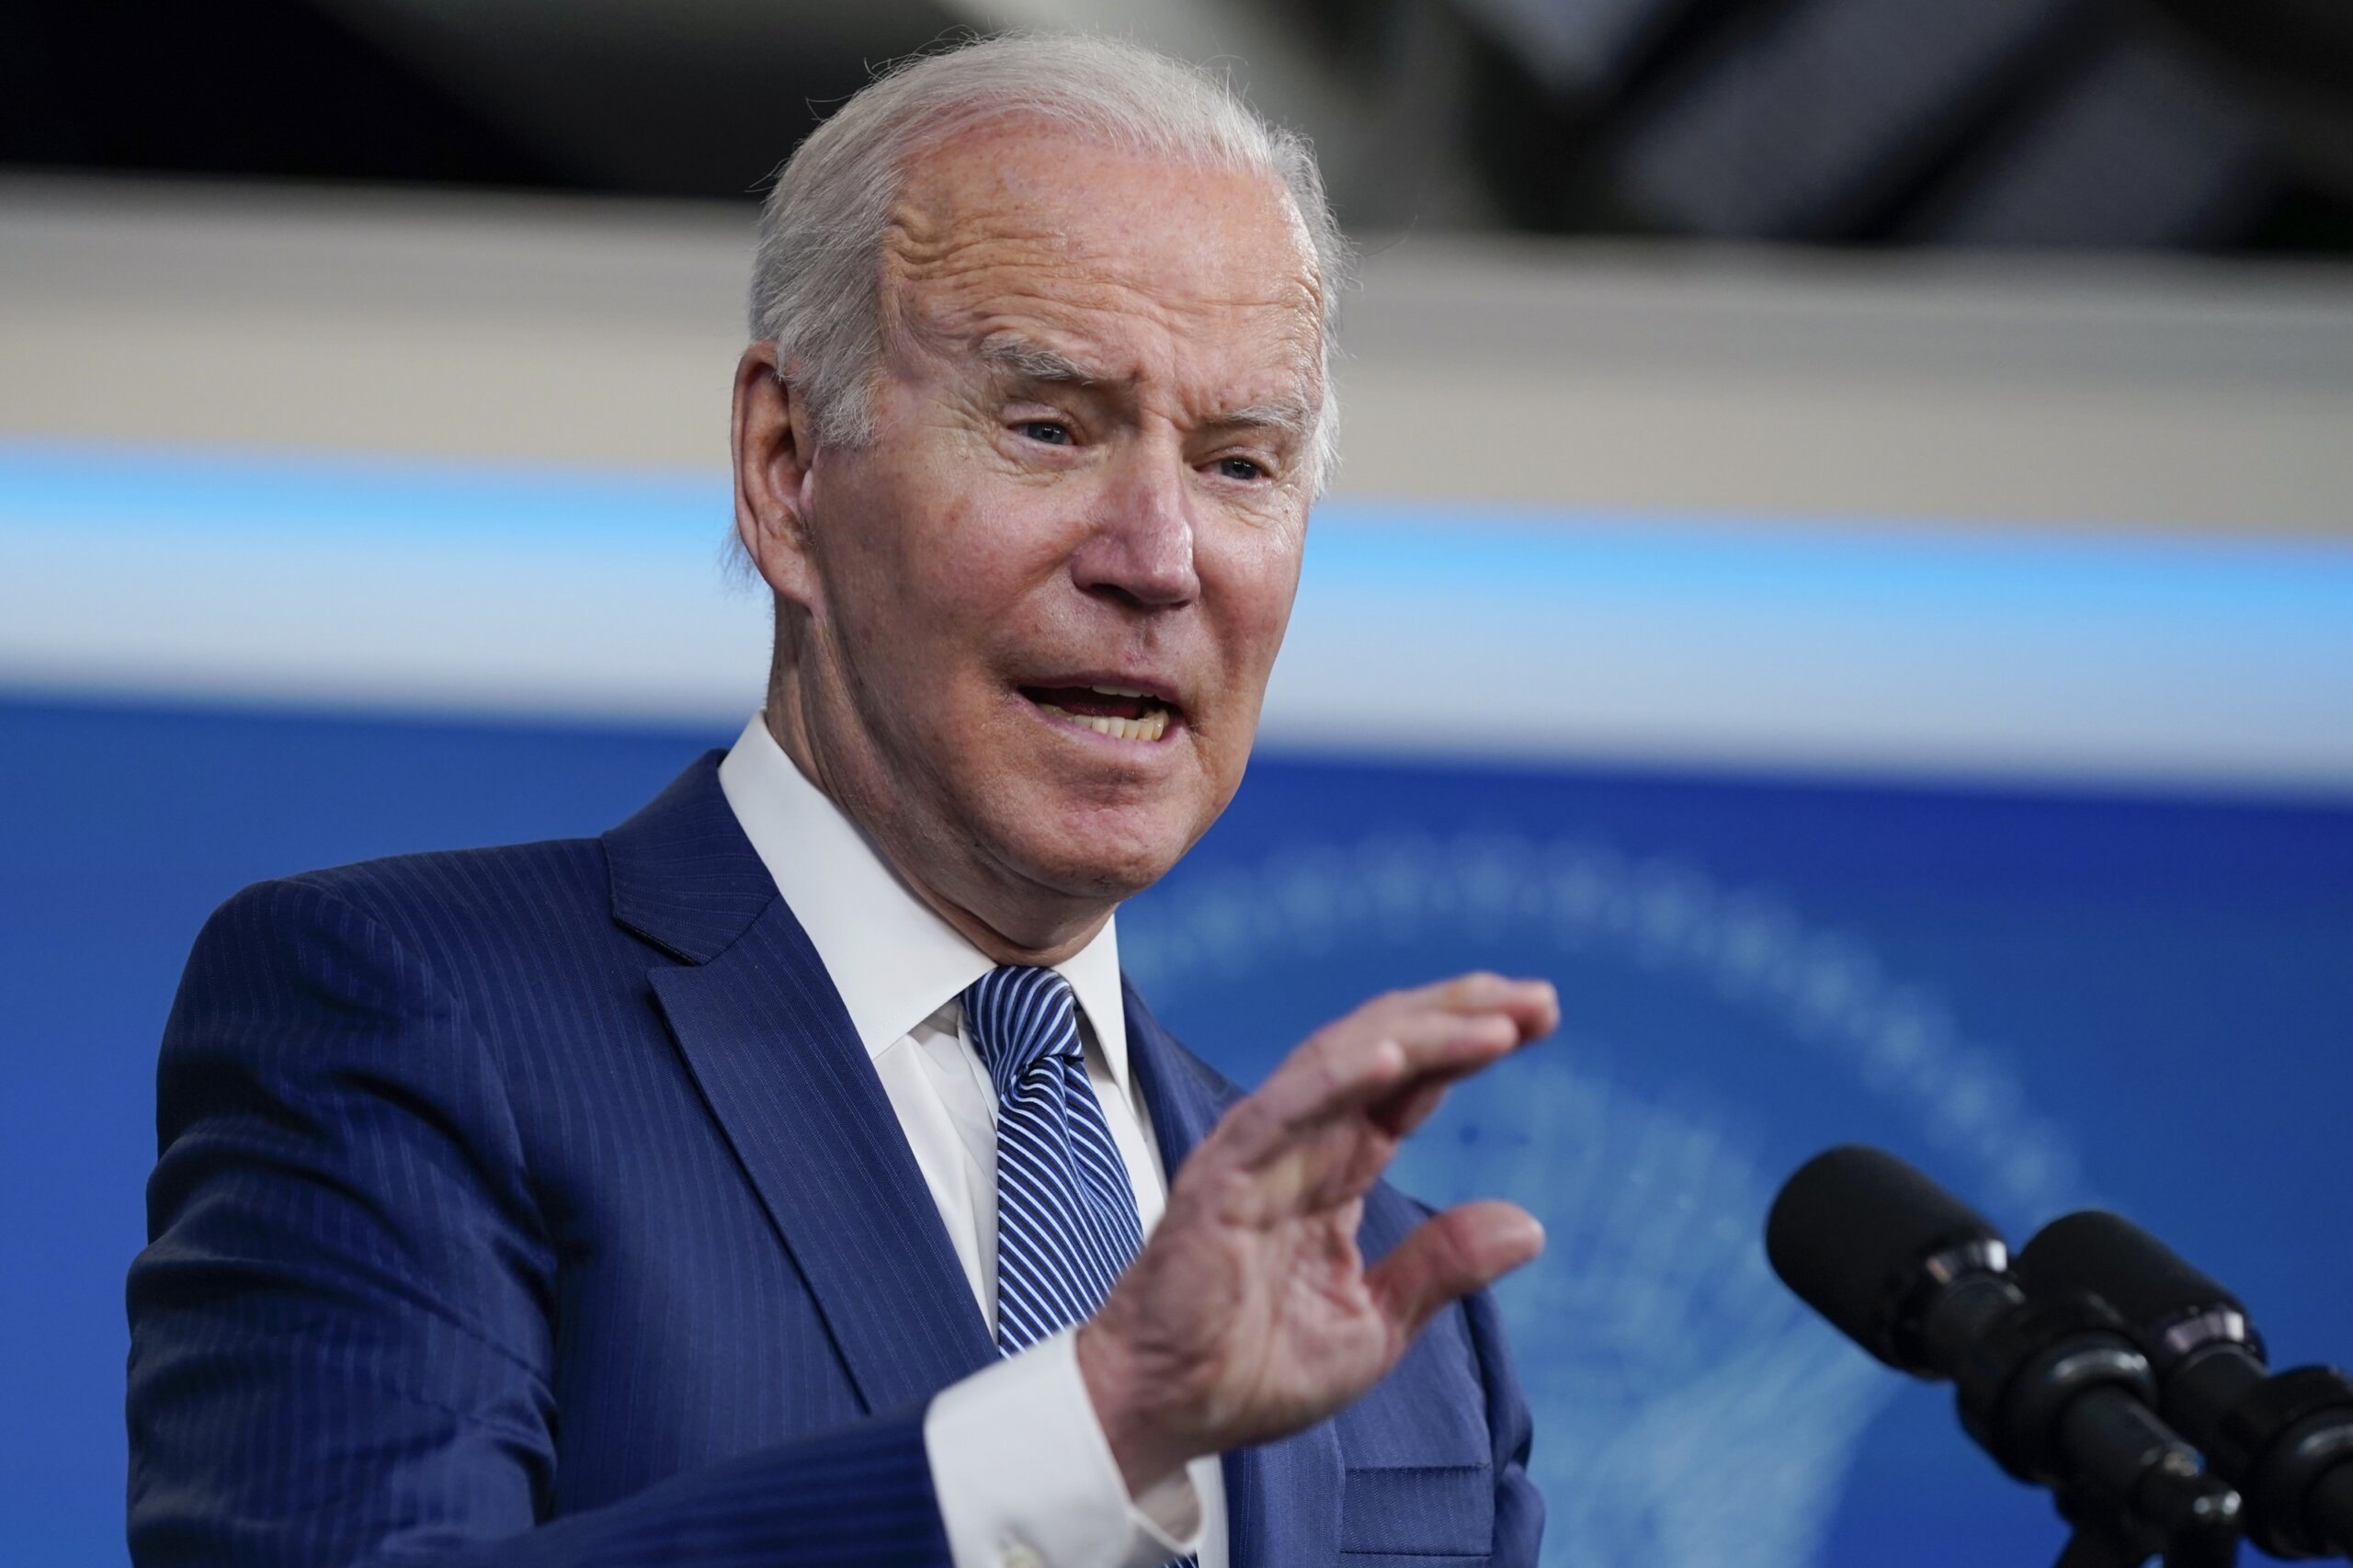 Pushing COVID-19 boosters, Biden says ‘we need to be ready’ - WTOP News